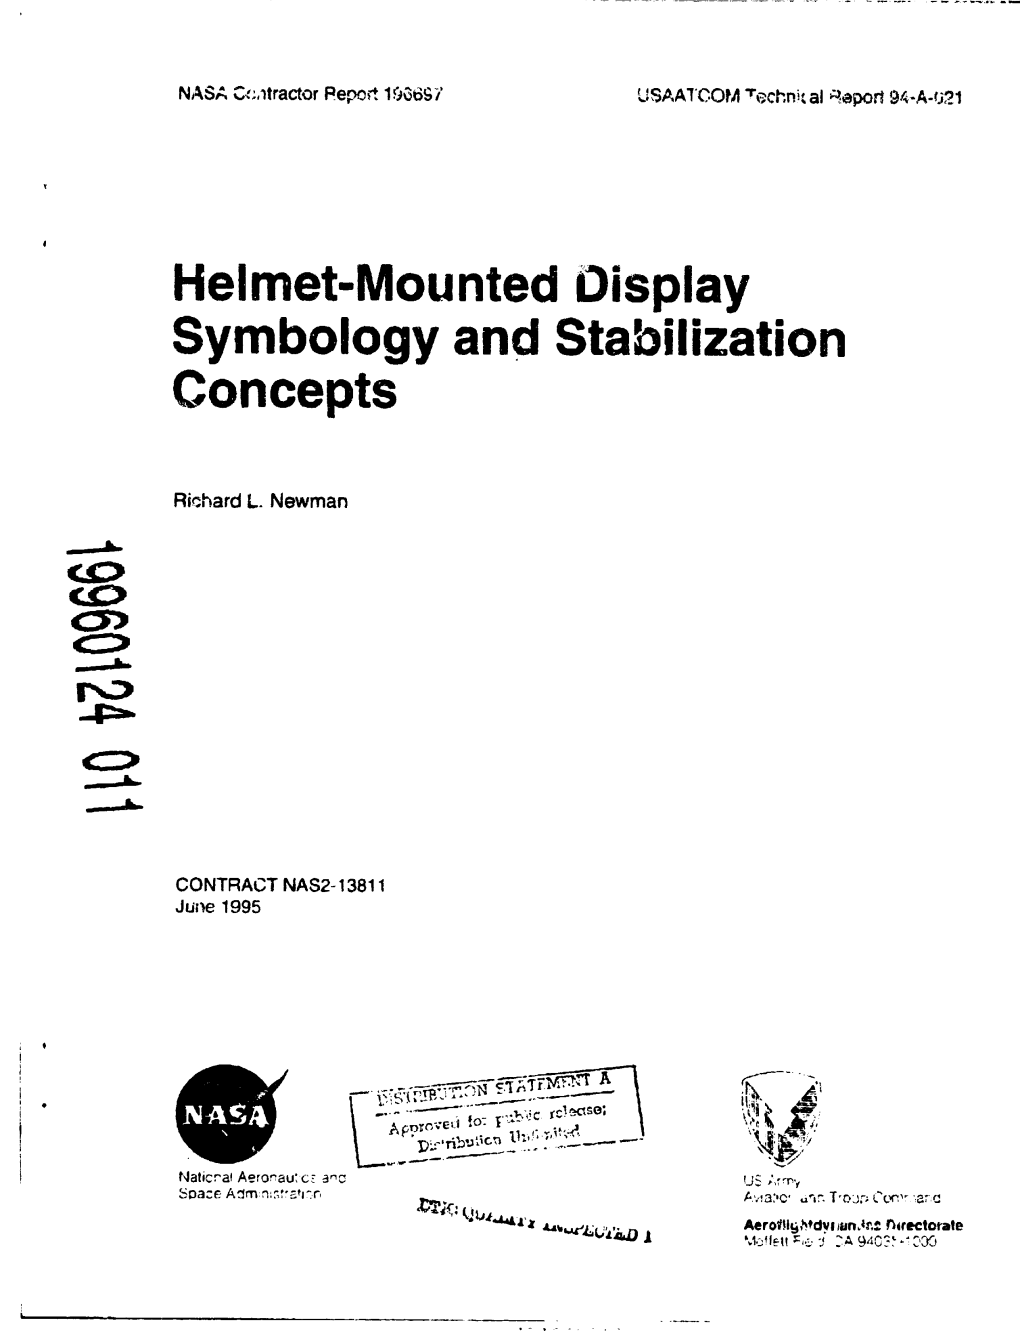 Helmet-Mounted Oisplay Symbology and Stabilization Concepts